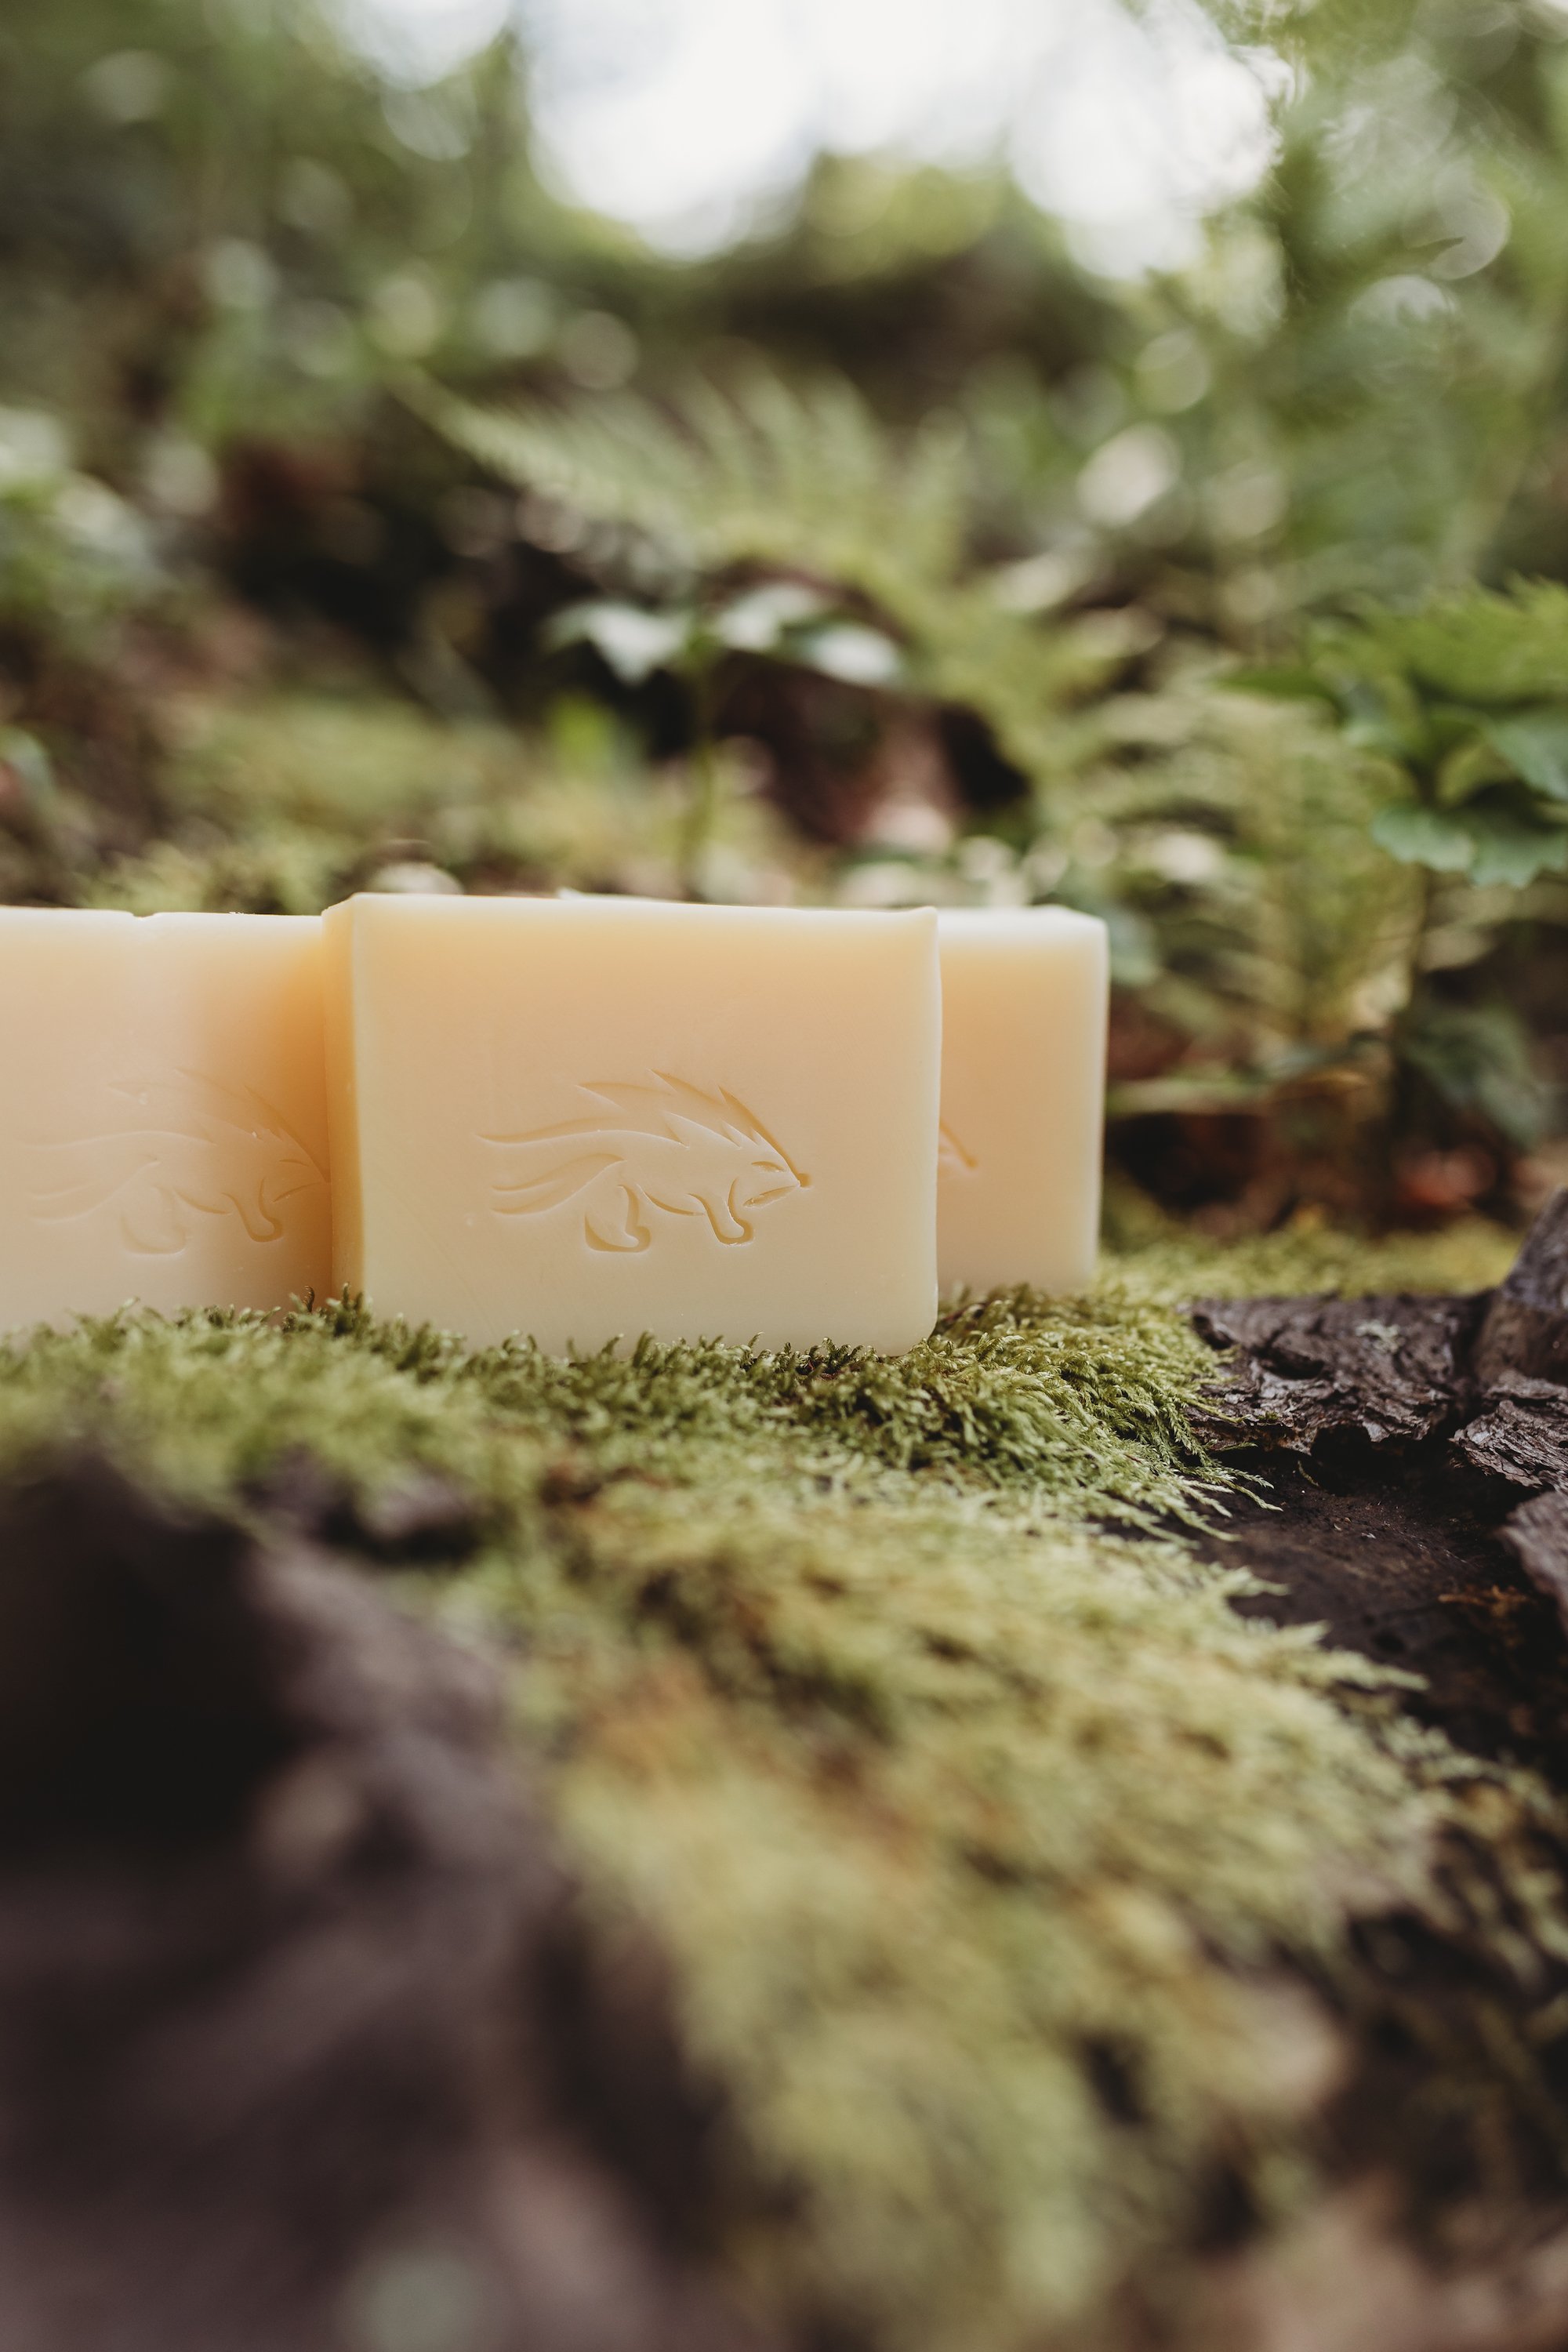 PINE TAR BAR SOAP, Natural Instant Itch Relief Soap Bar